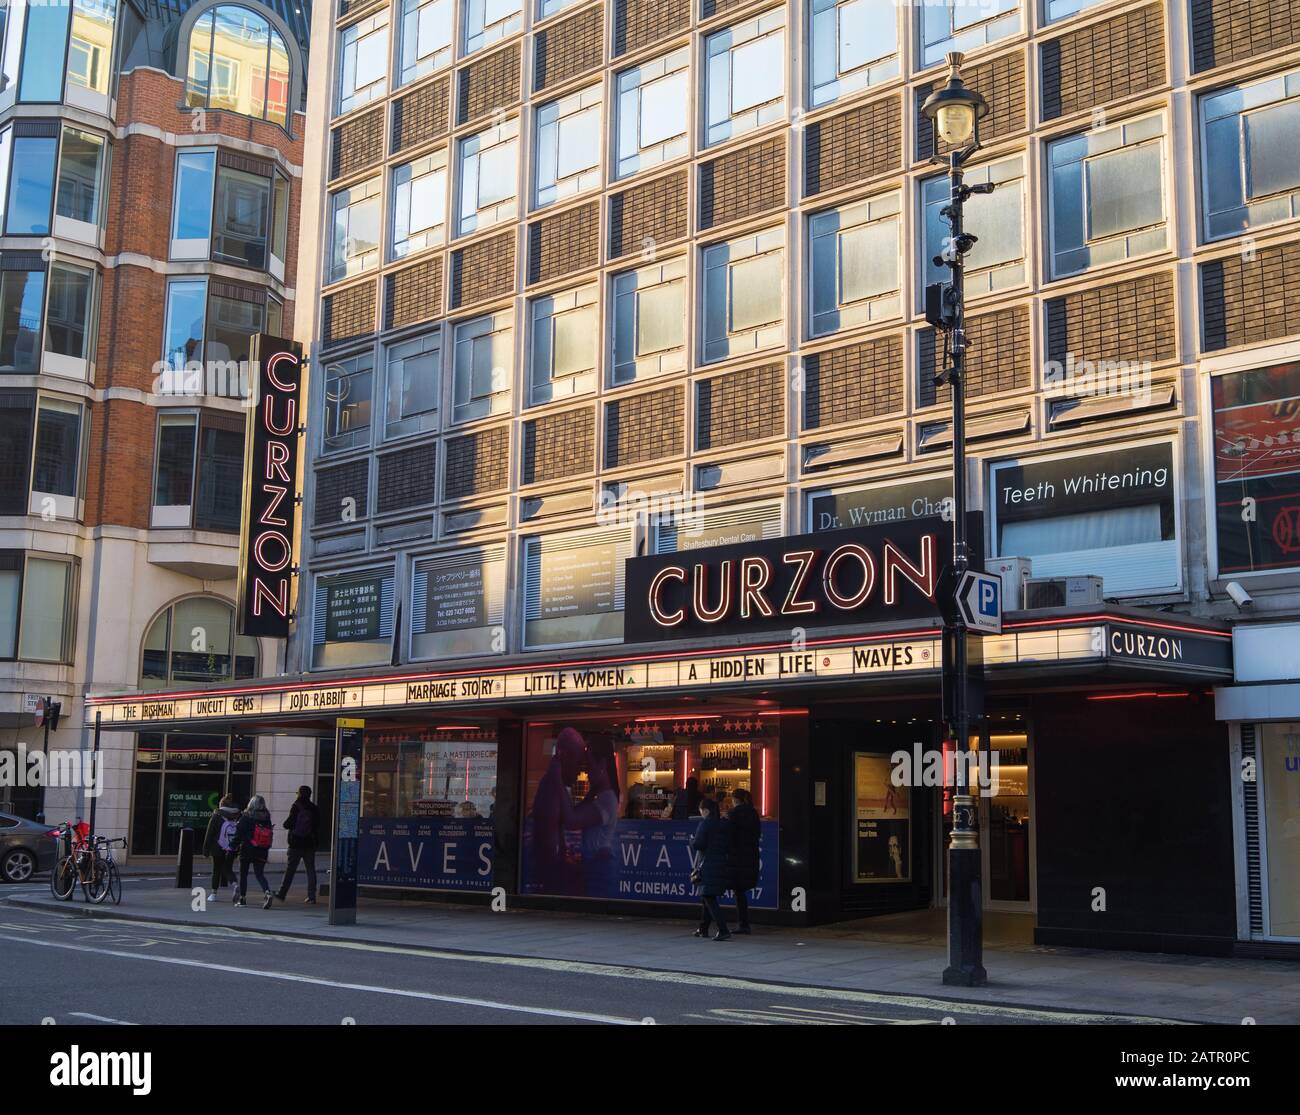 Curzon cinema on Shaftesbury Avenue in London in the afternoon sunlight ...